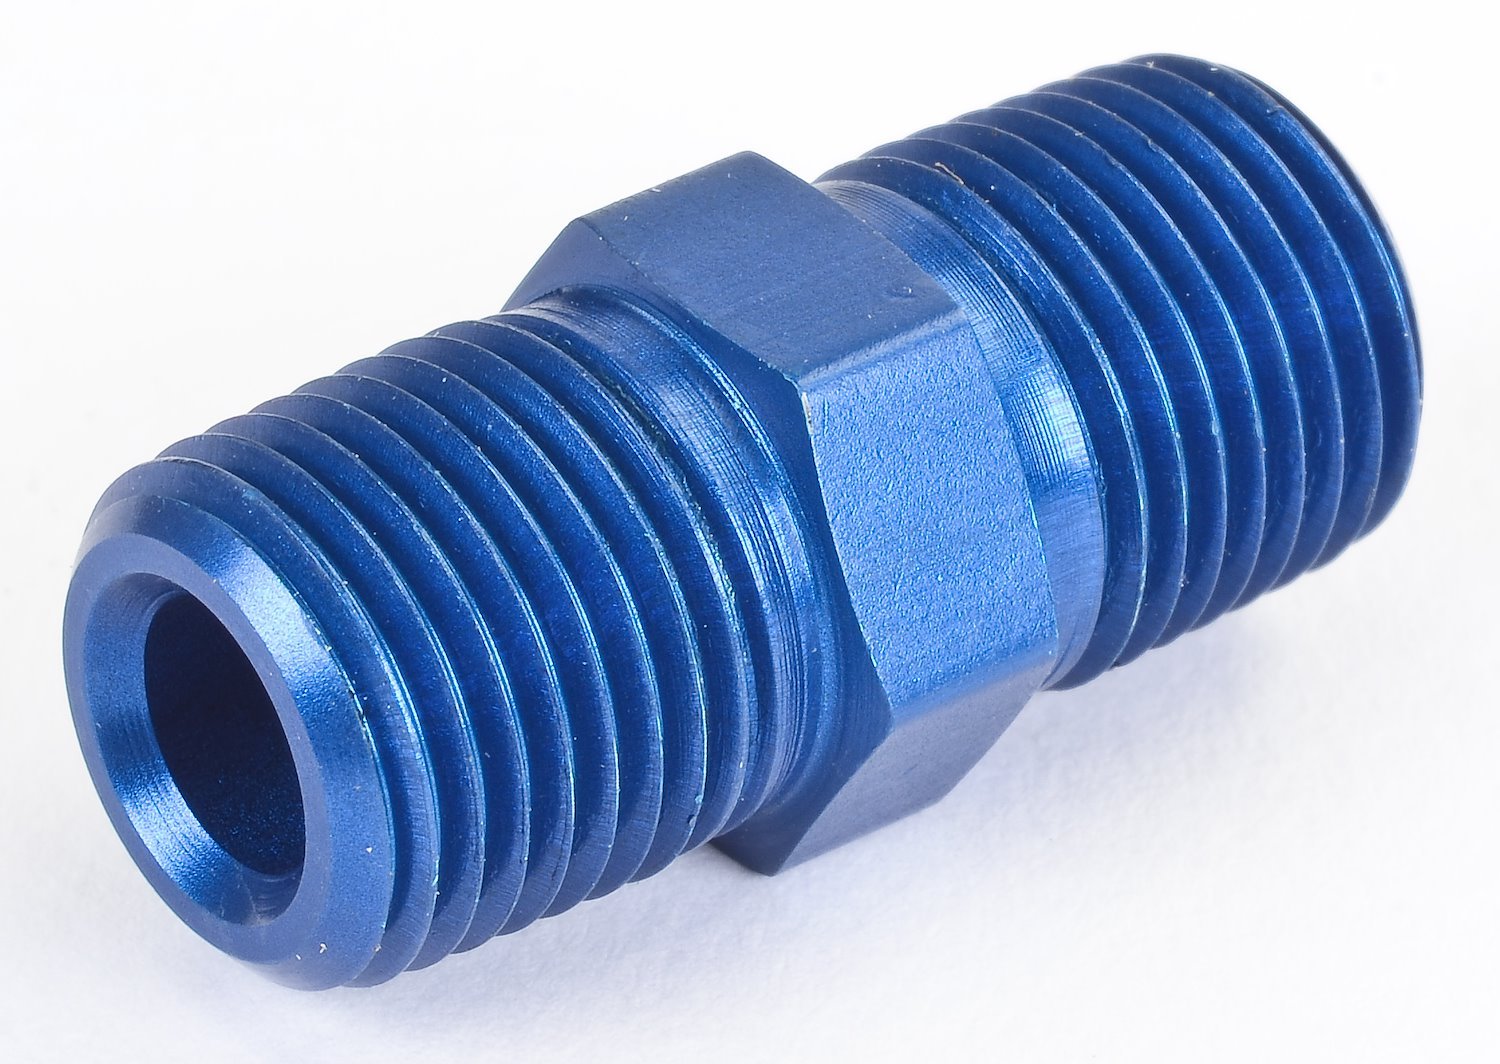 NPT to NPT Straight Union Fitting [1/8 in. NPT Male to 1/8 in. NPT Male, Blue]